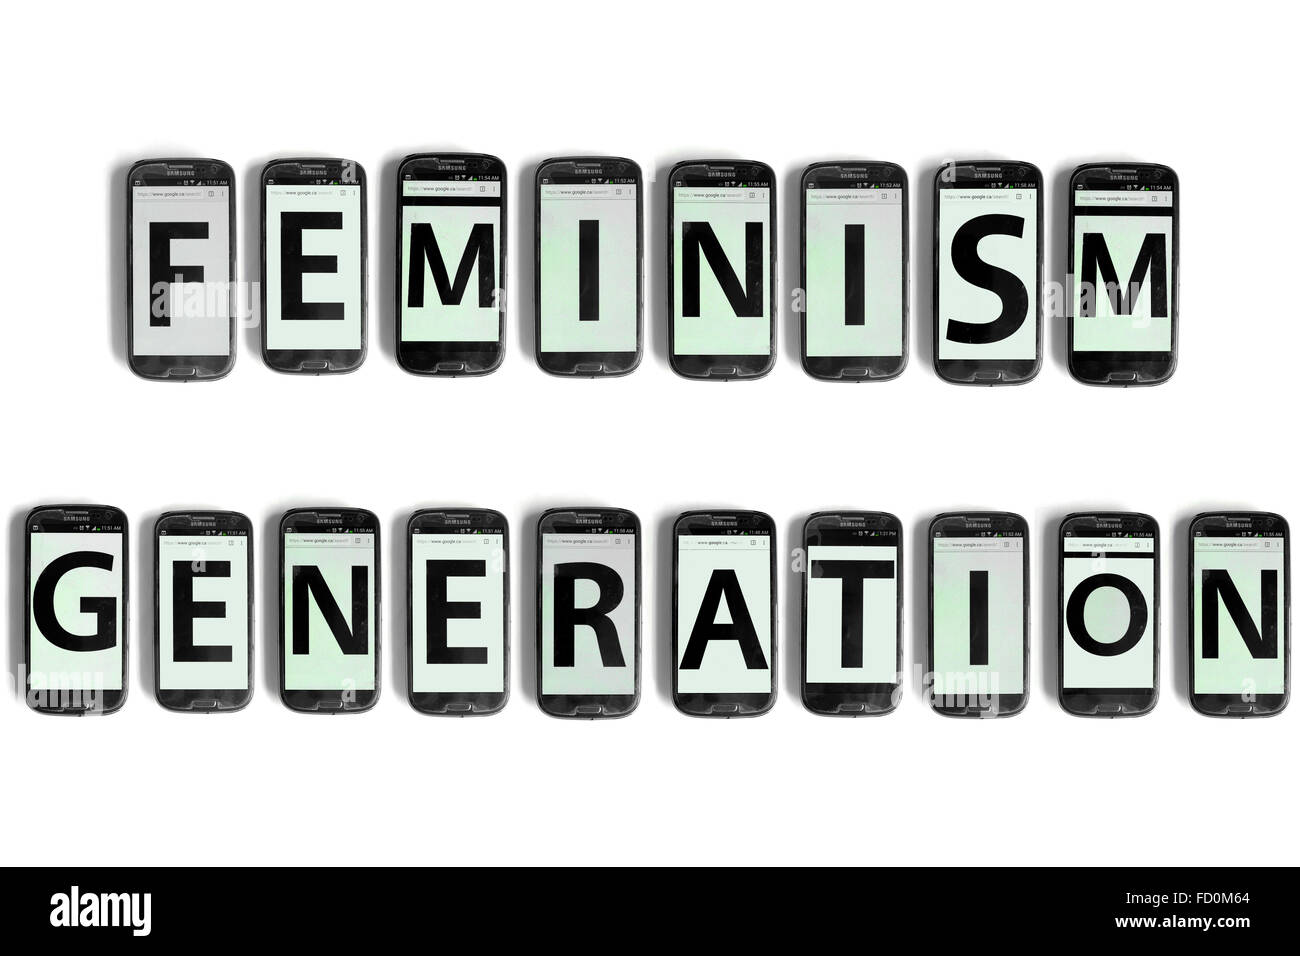 Feminism Generation on the screens of smartphones photographed against a white background. Stock Photo